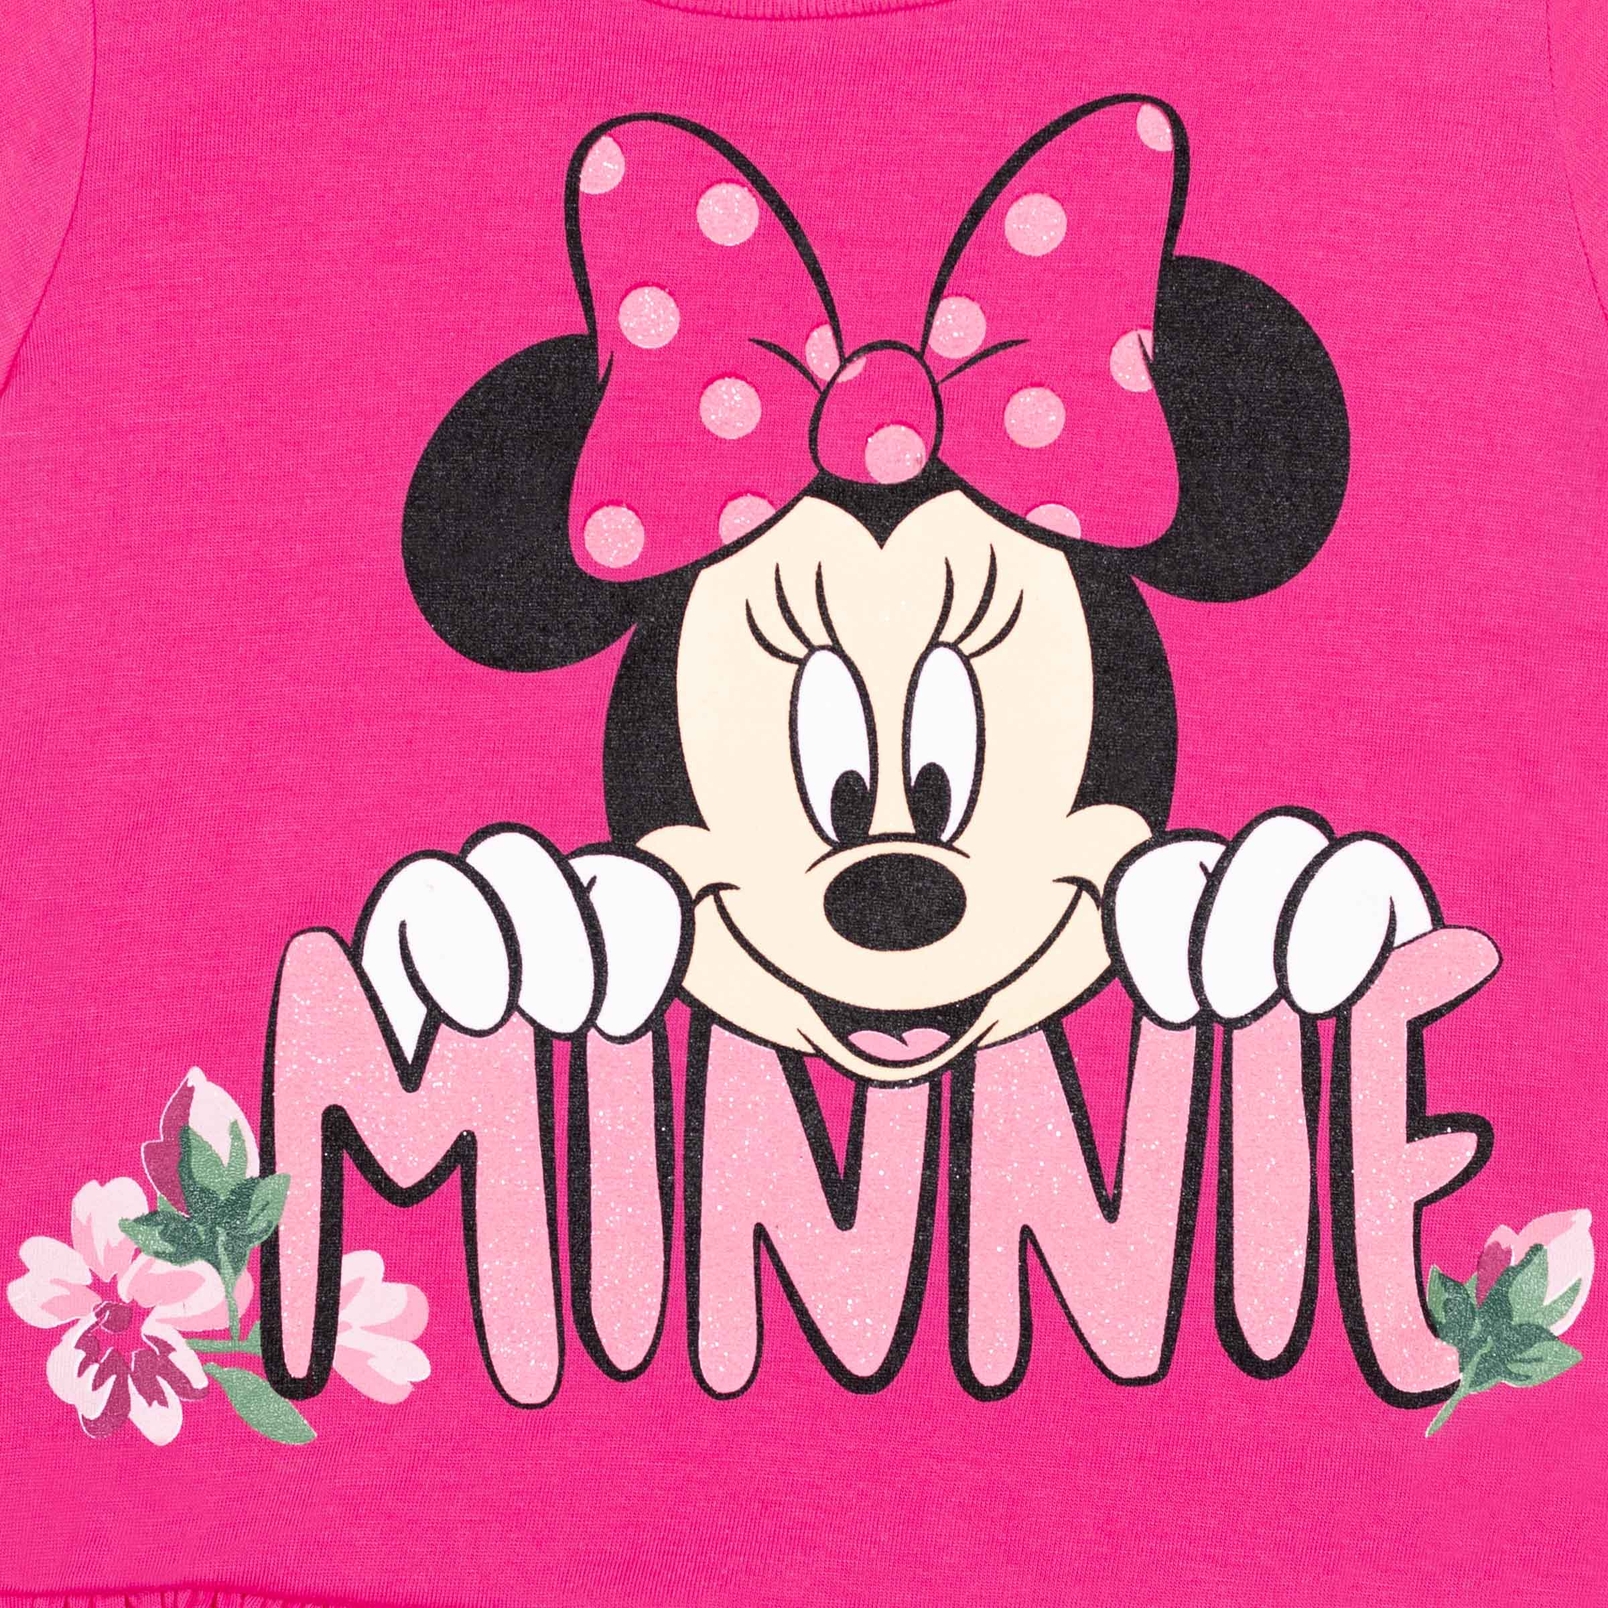 Disney Minnie Mouse Toddler Girls Peplum T-Shirt Bike Shorts and Scrunchie 3 Piece Outfit Set Infant to Big Kid - image 5 of 5